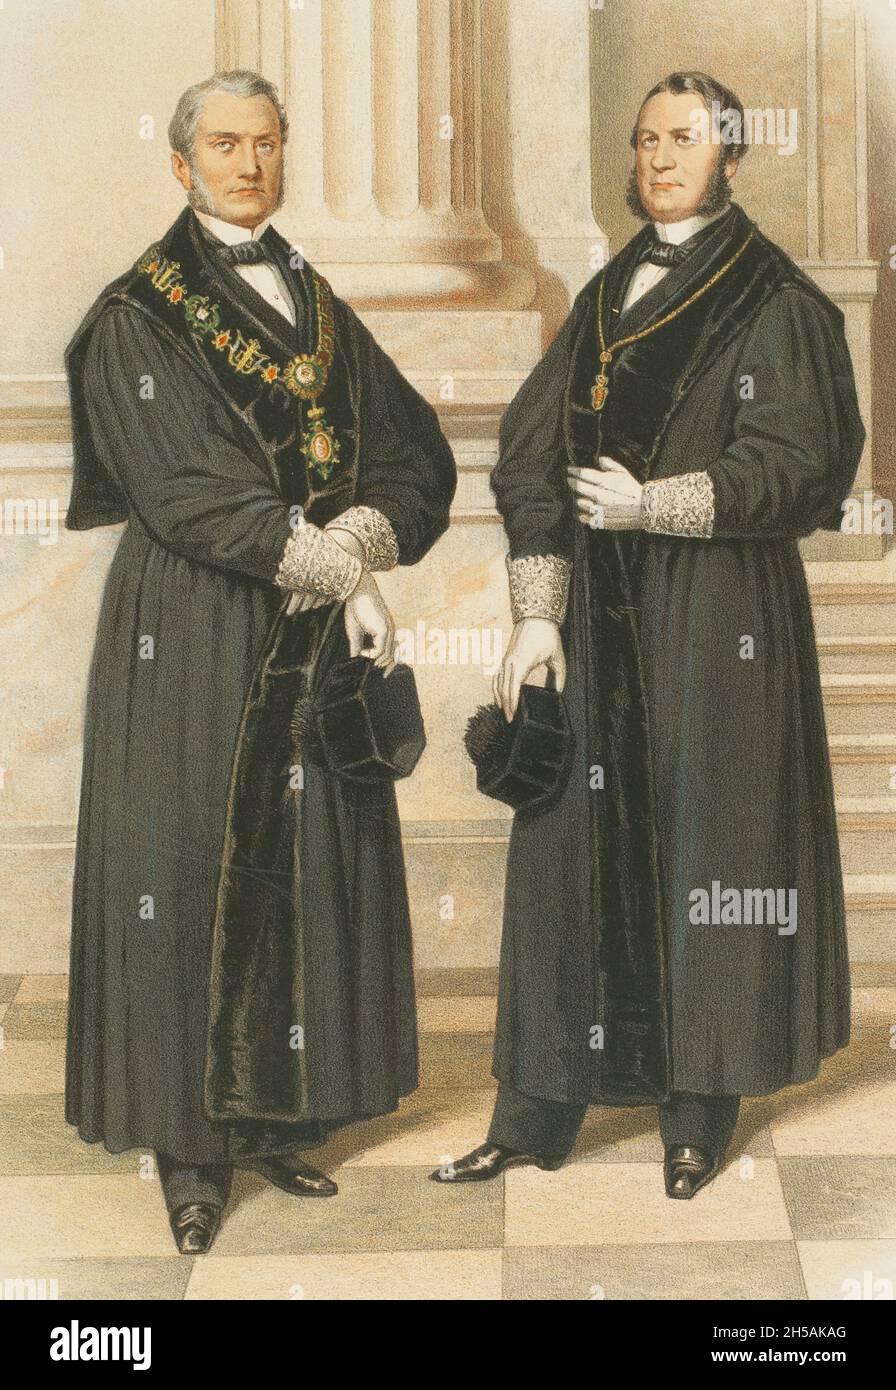 President of the Supreme Court of Justice (left) and Judge of Hearing (right). Chromolithography. Historia de las Ordenes de Caballería y de las Condecoraciones Españolas (History of the Orders of Chivalry and the Spanish Decorations). Madrid, 1865. Spain. Stock Photo